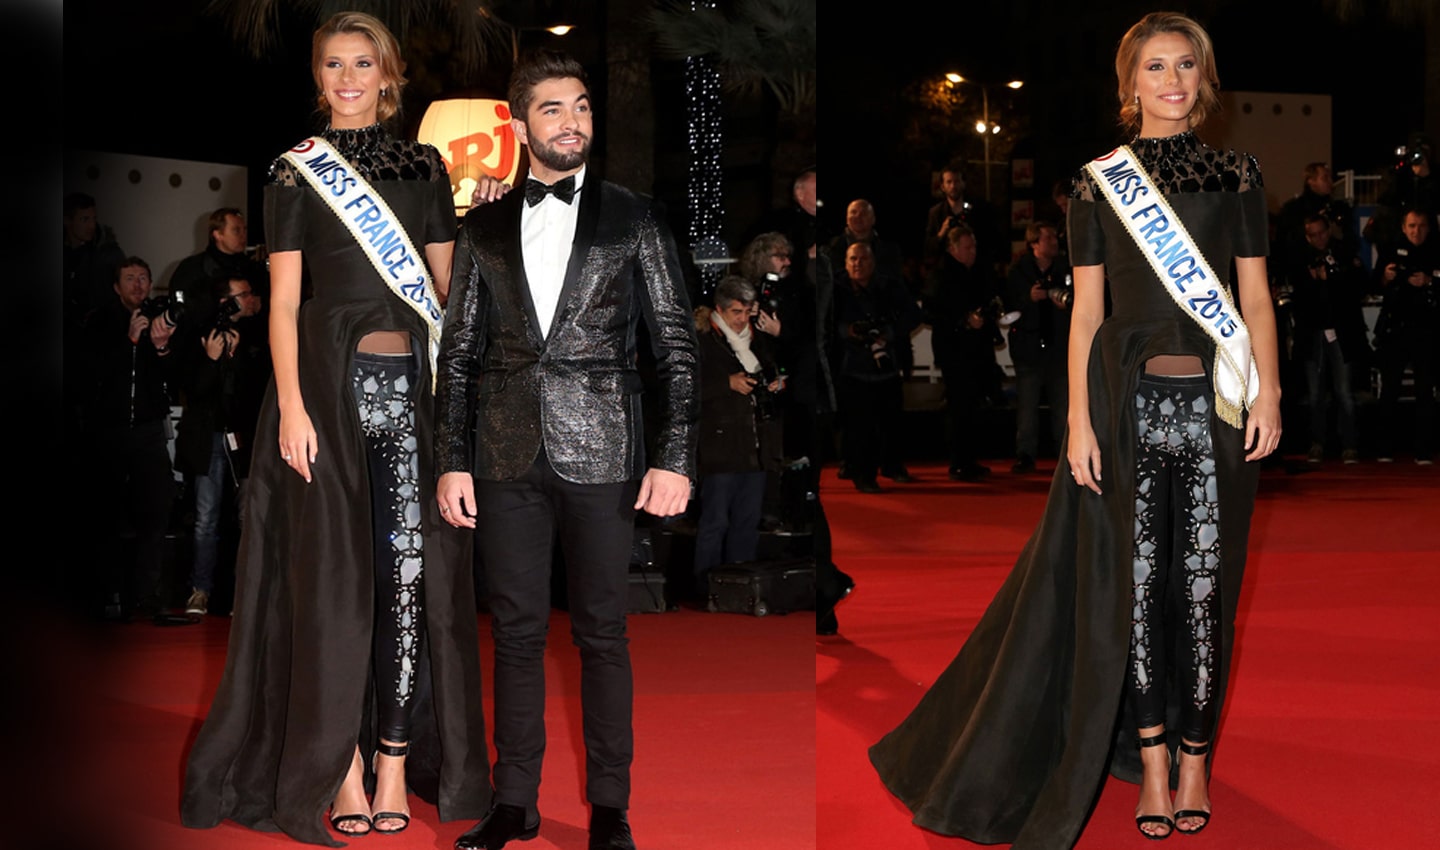 Miss-France-2015-Camille-Cerf-Cannes-robe-couture-on-aura-tout-vu